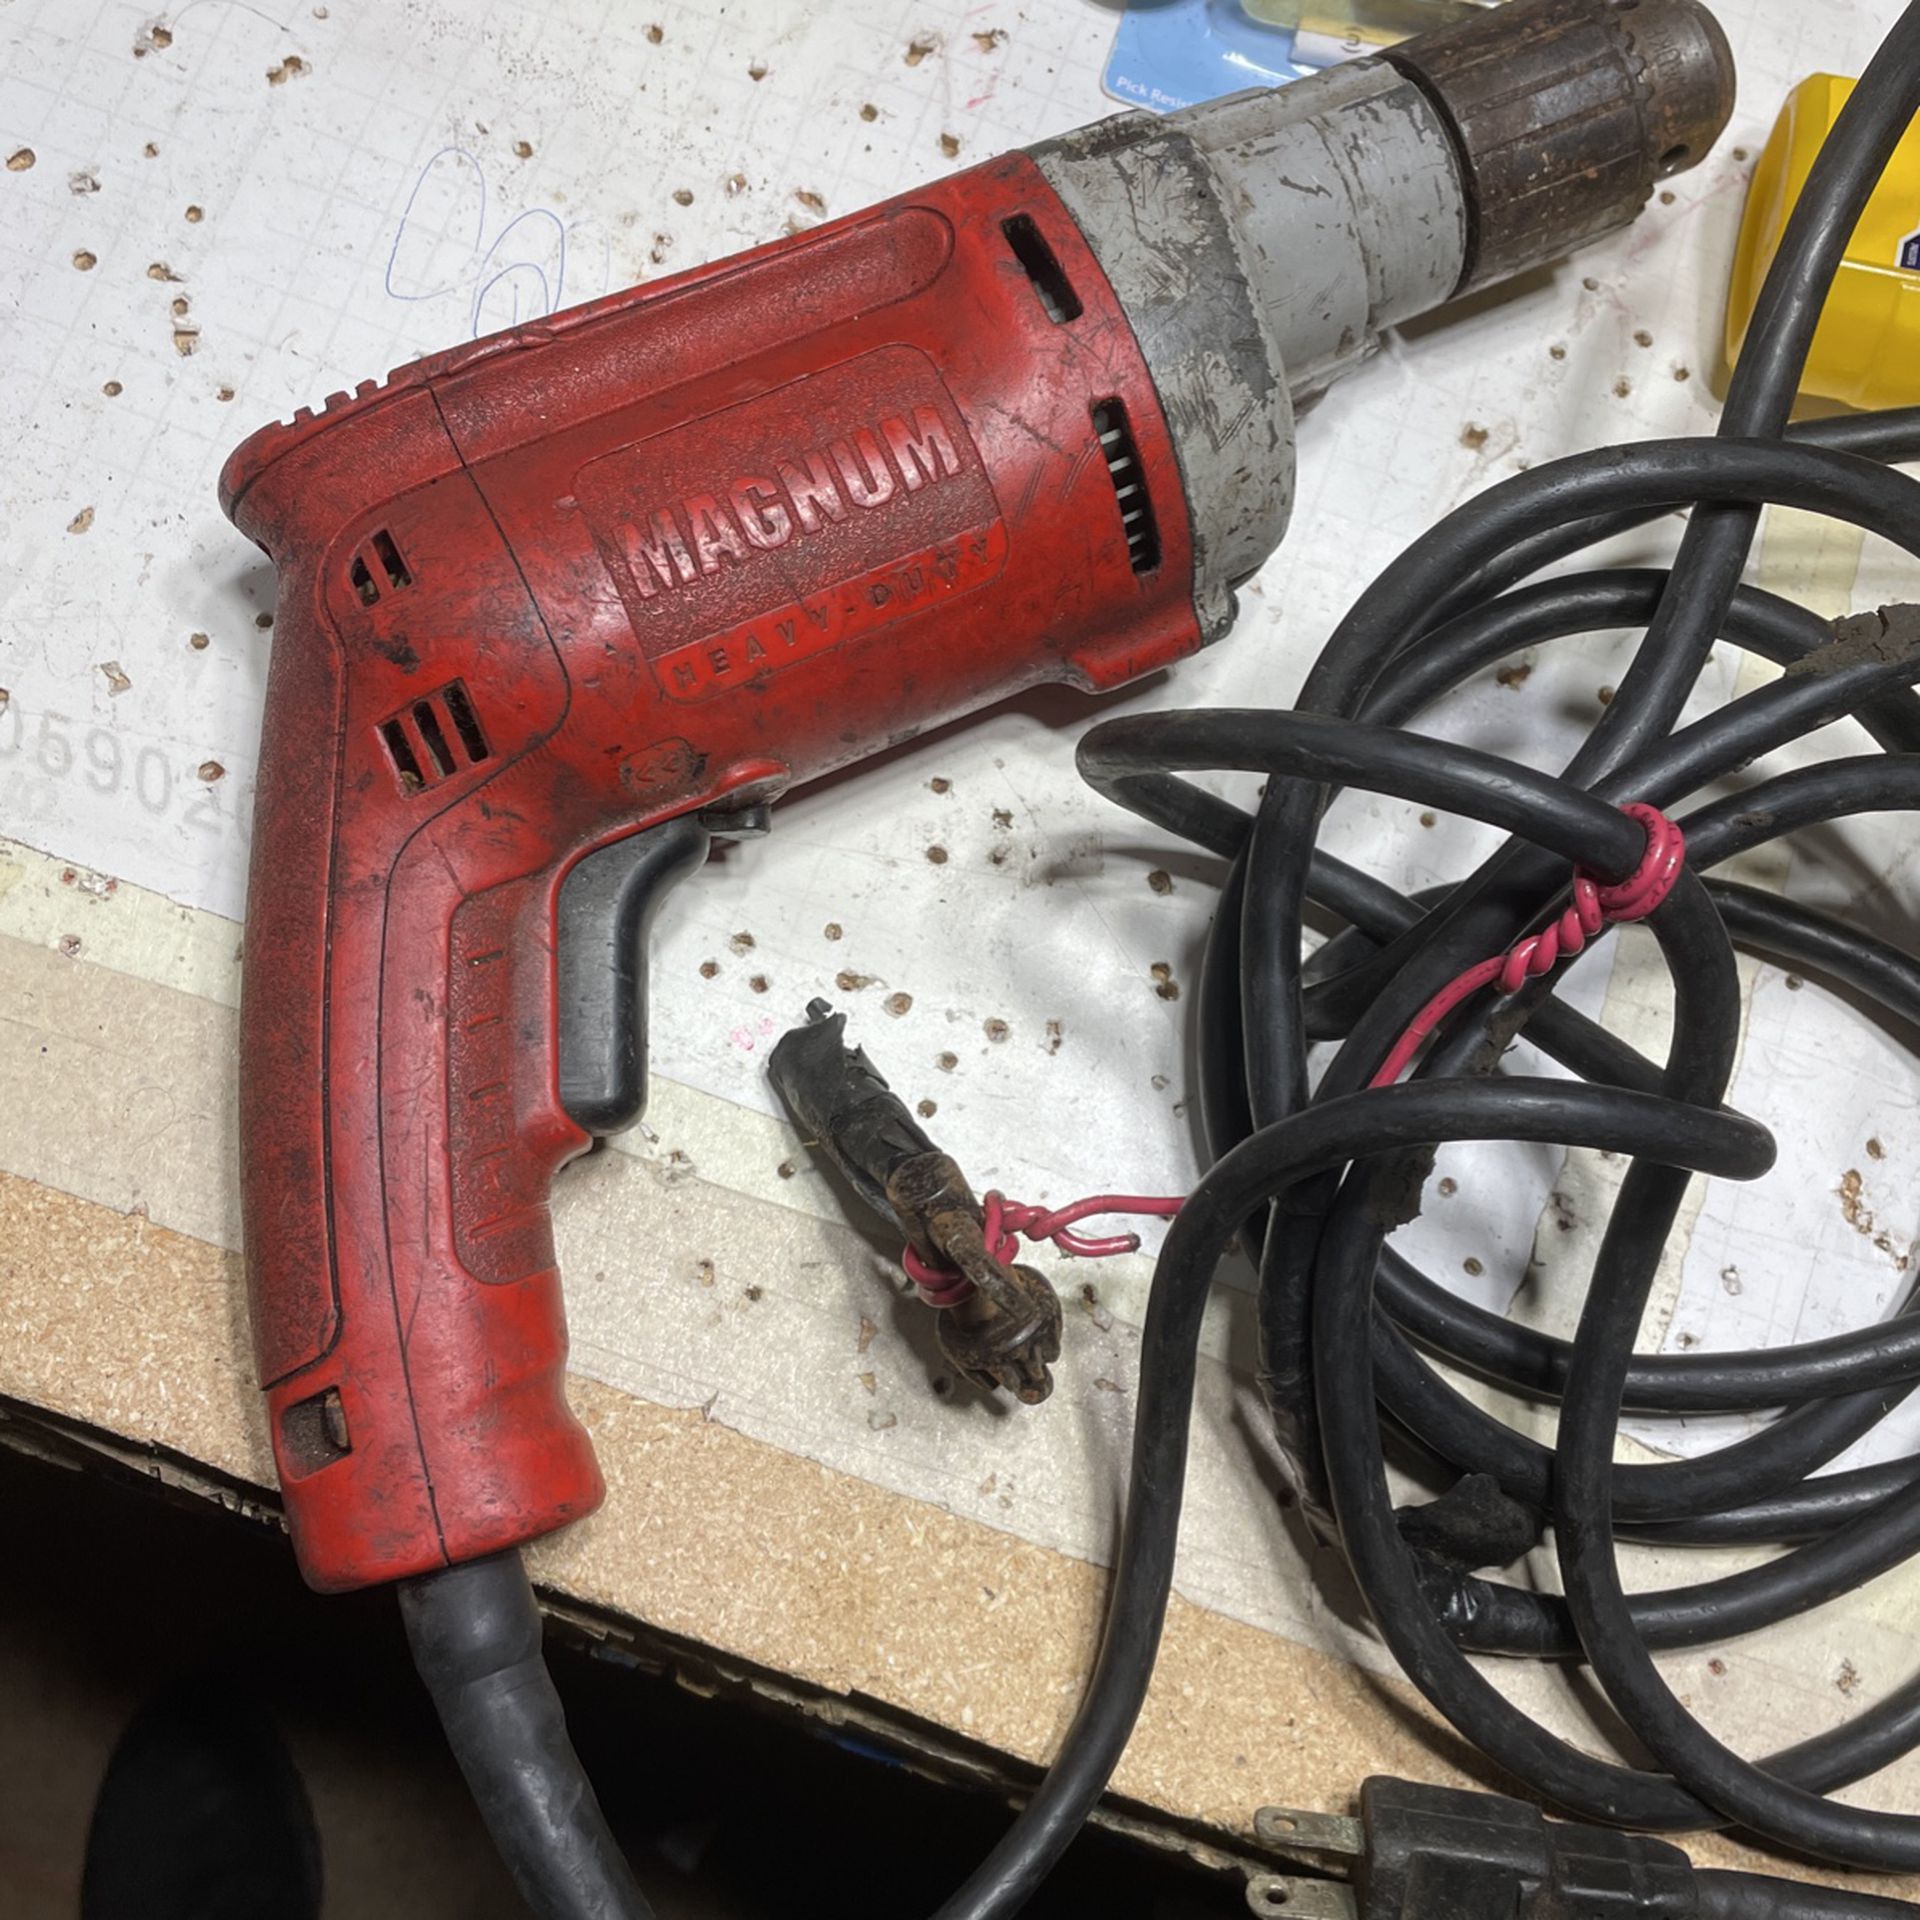 Magnum, Heavy Duty Drill Corded